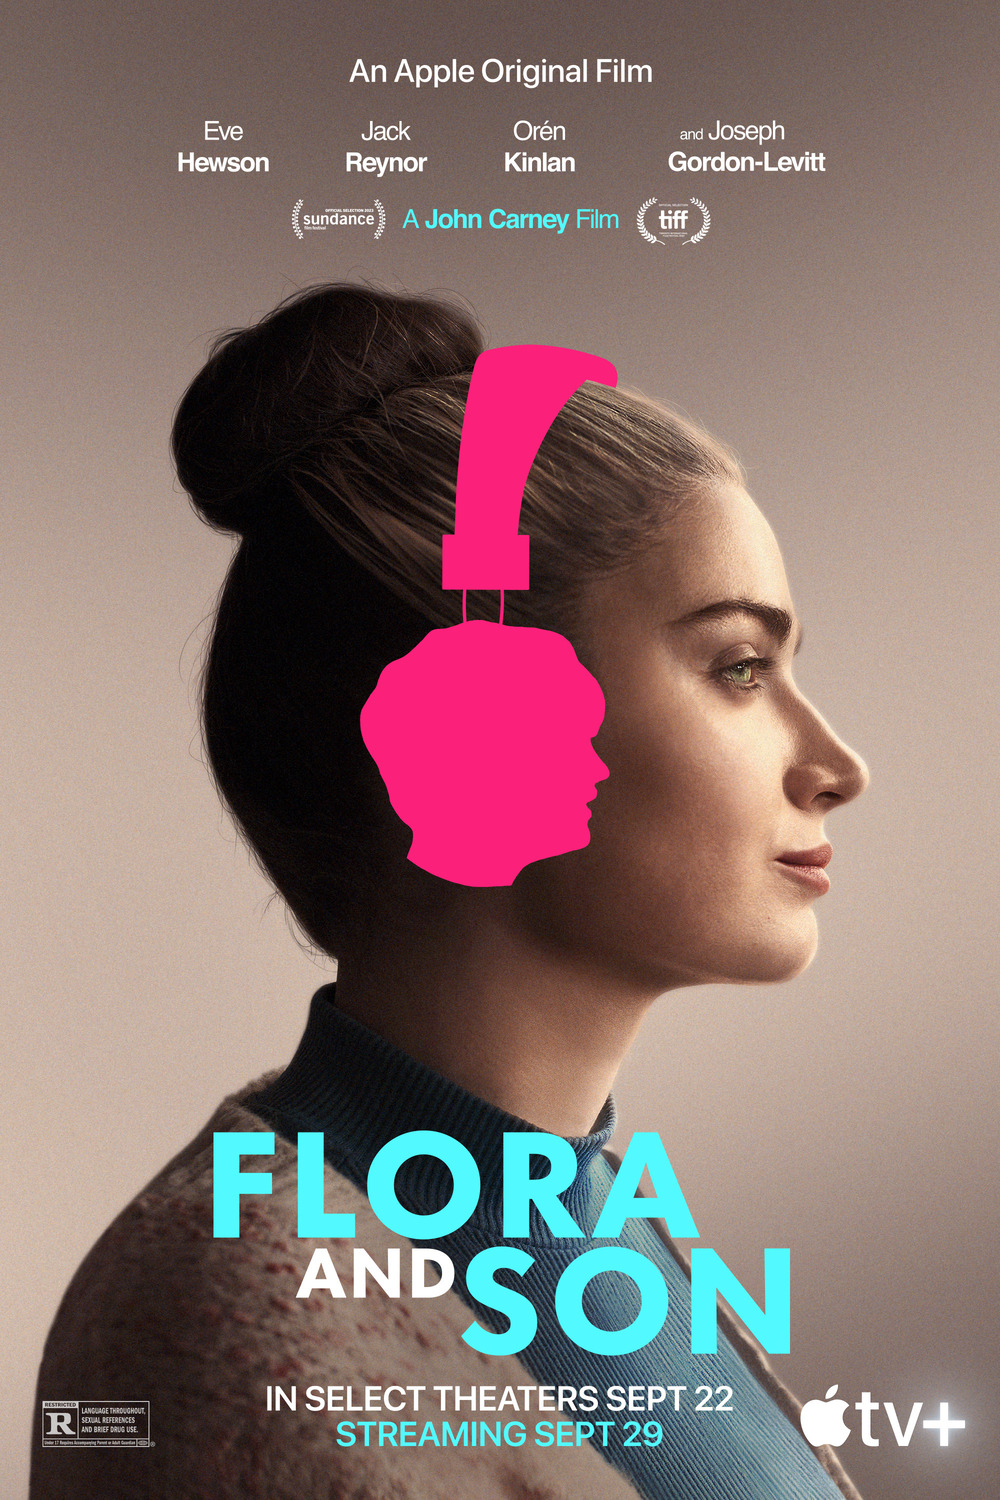 Extra Large Movie Poster Image for Flora and Son 